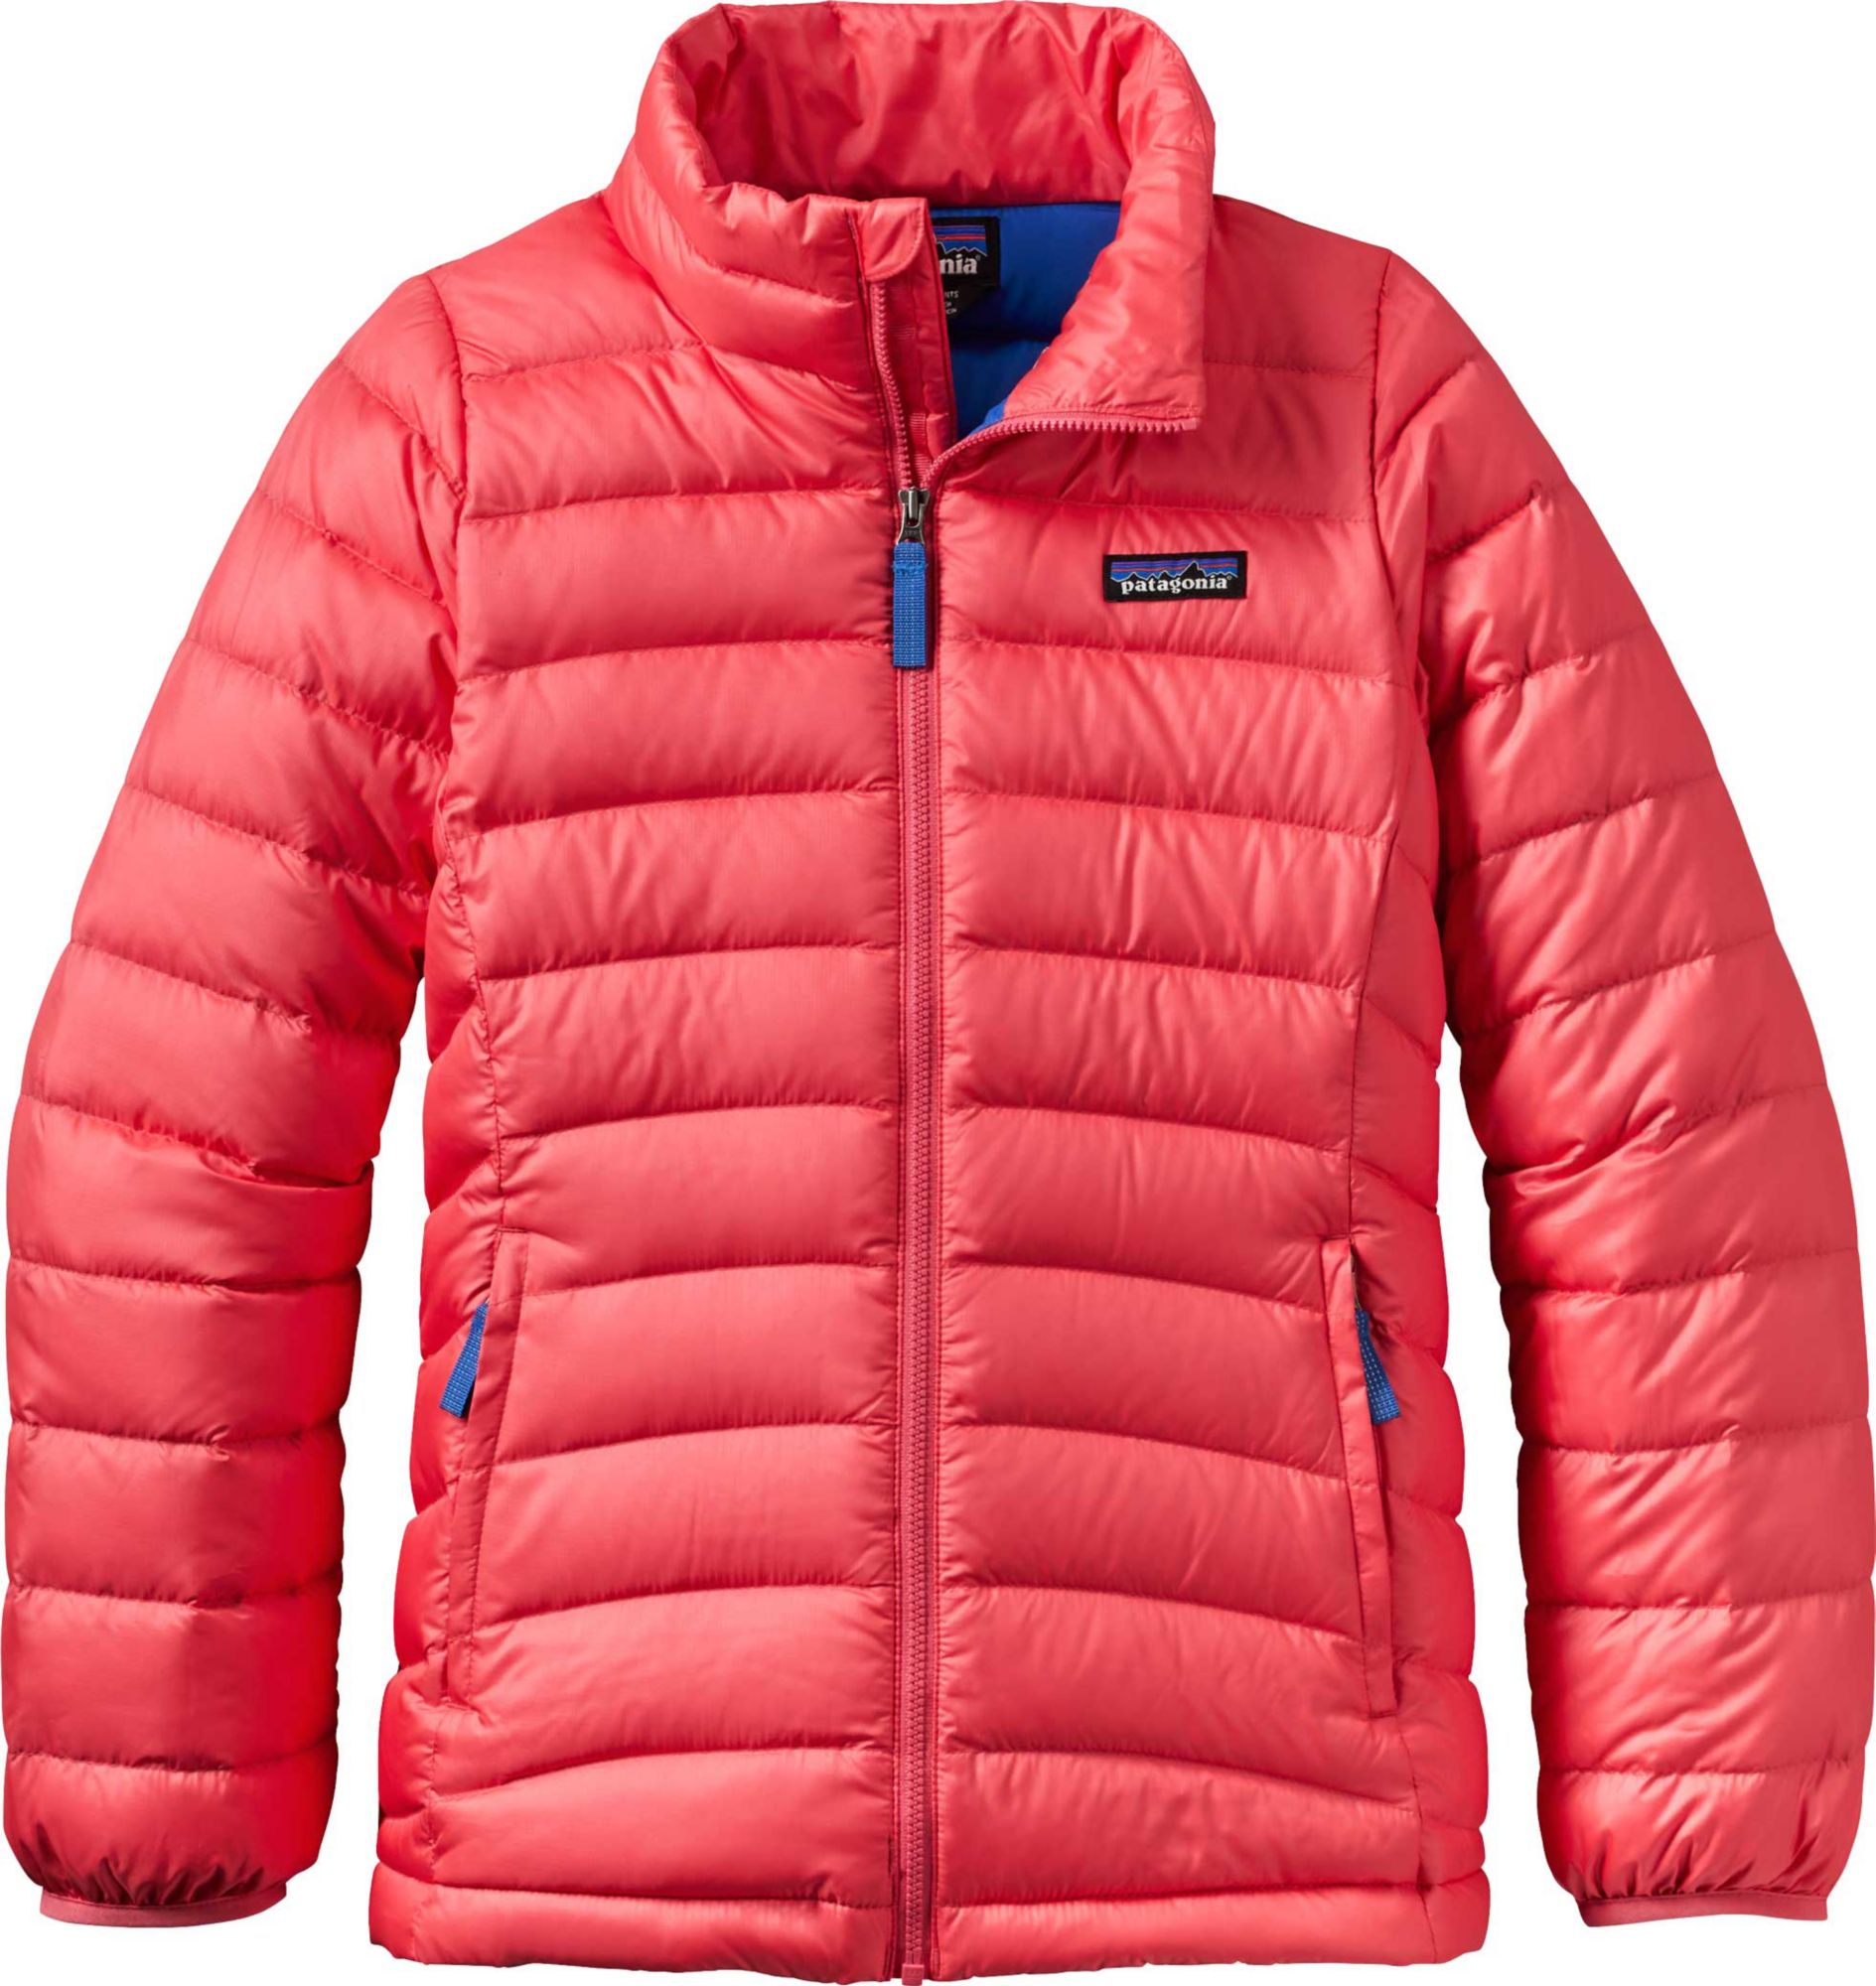 Patagonia Jackets & Vests | DICK'S Sporting Goods